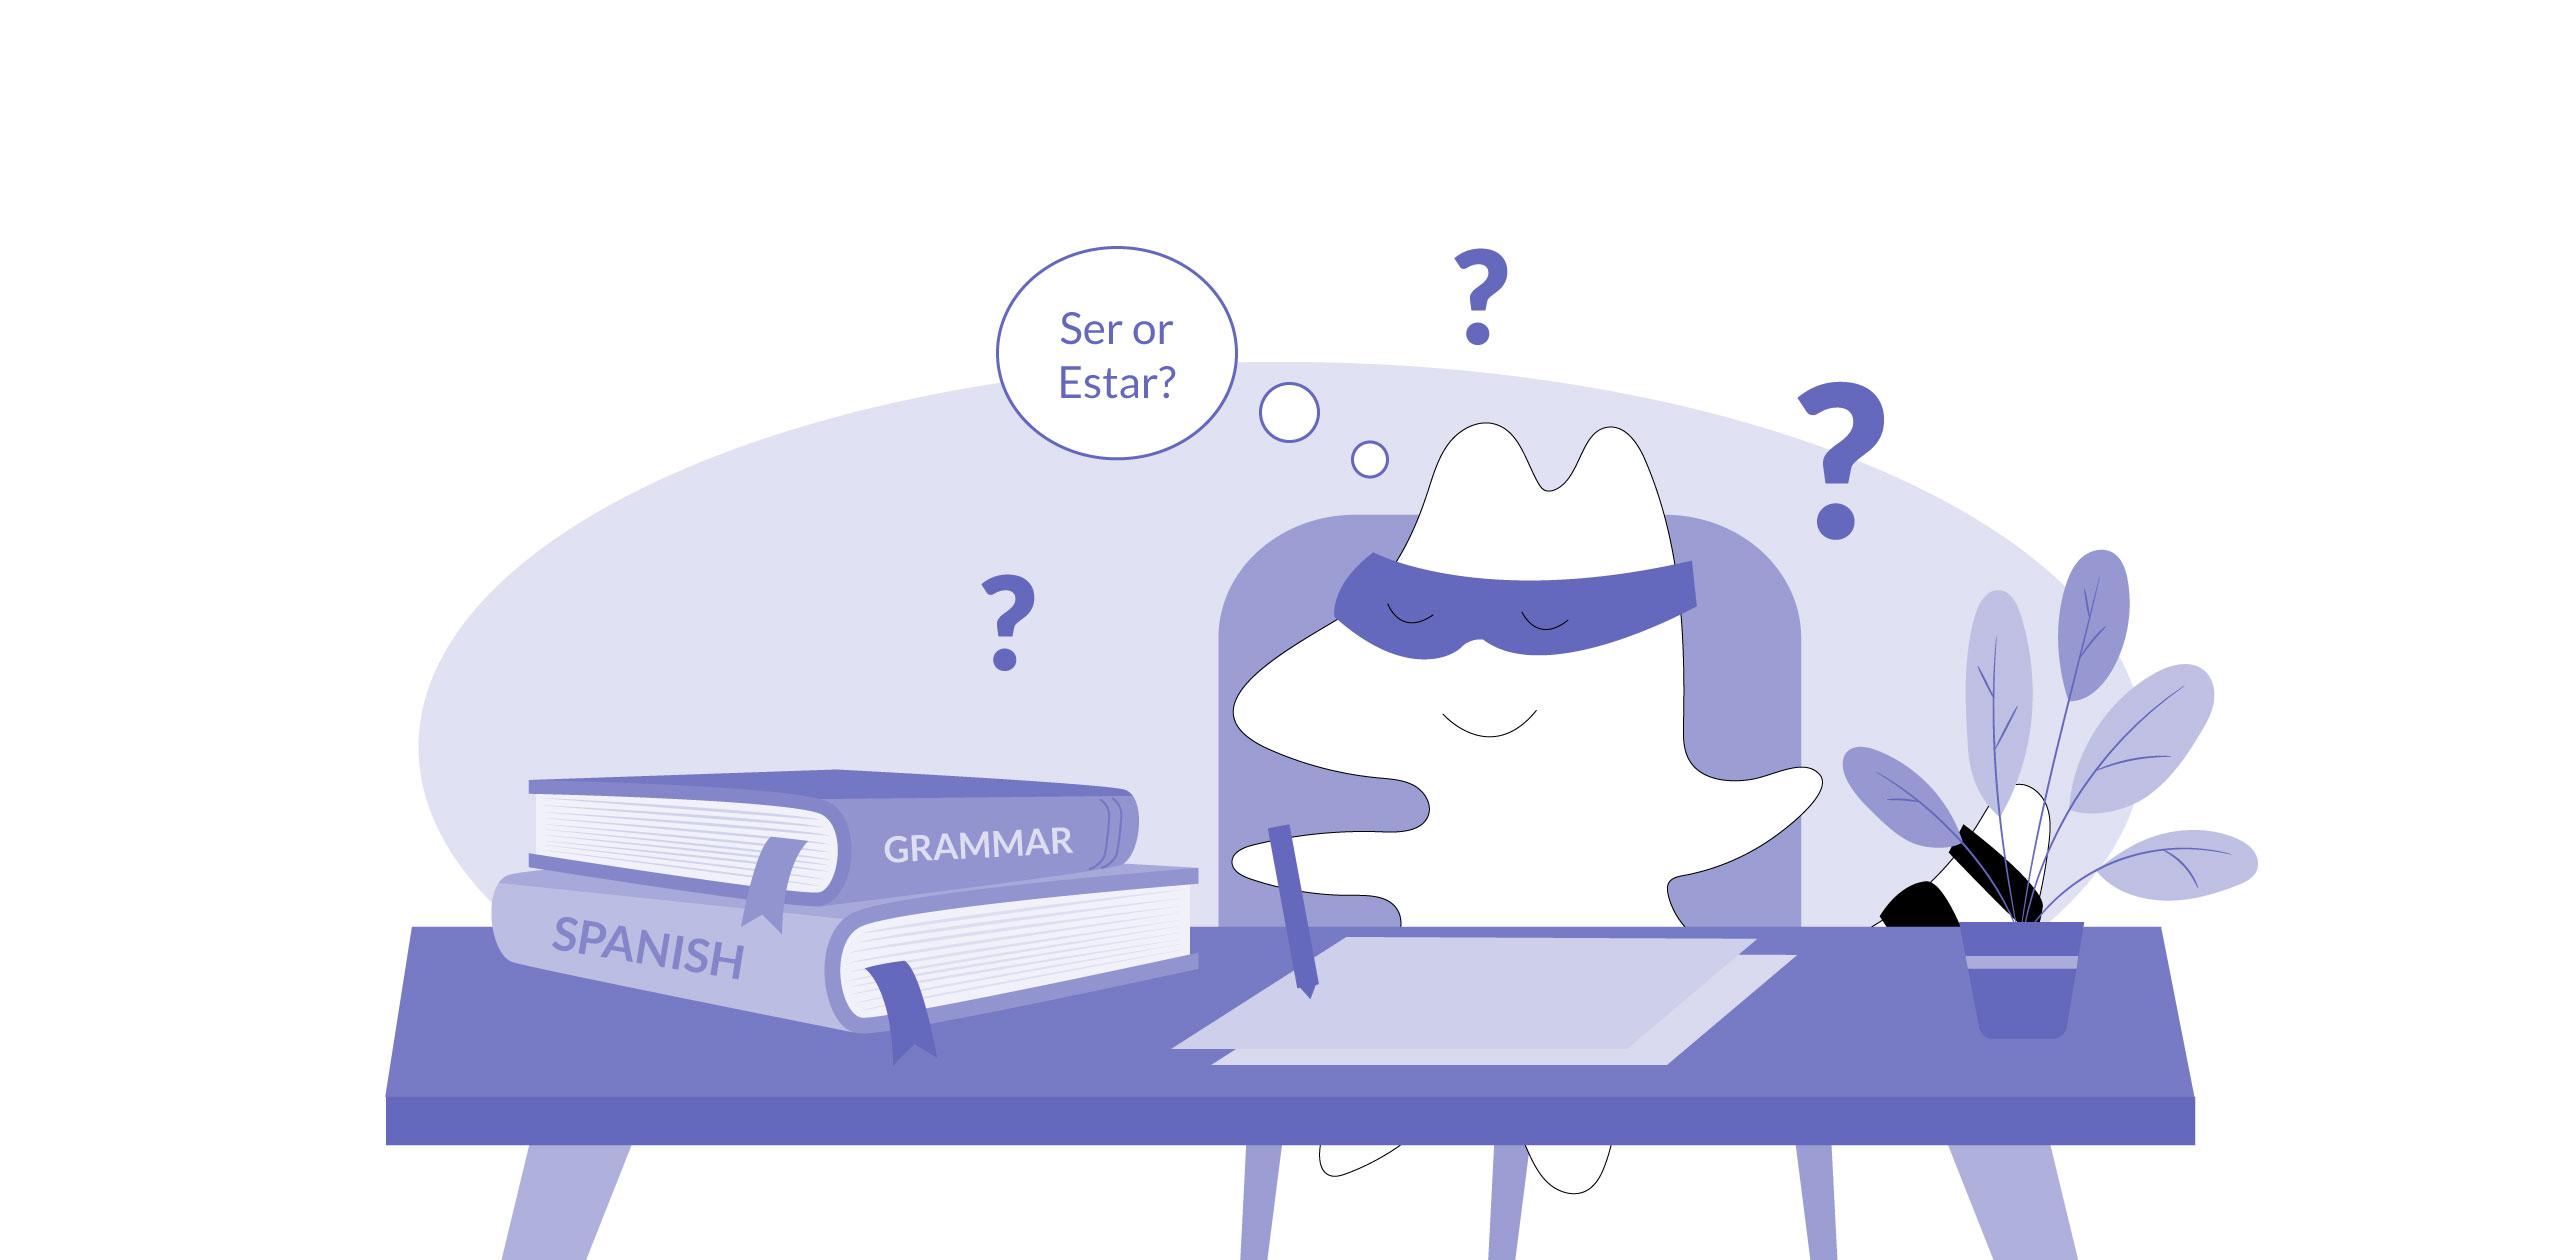 Ser' and 'estar': differences and uses in Spanish